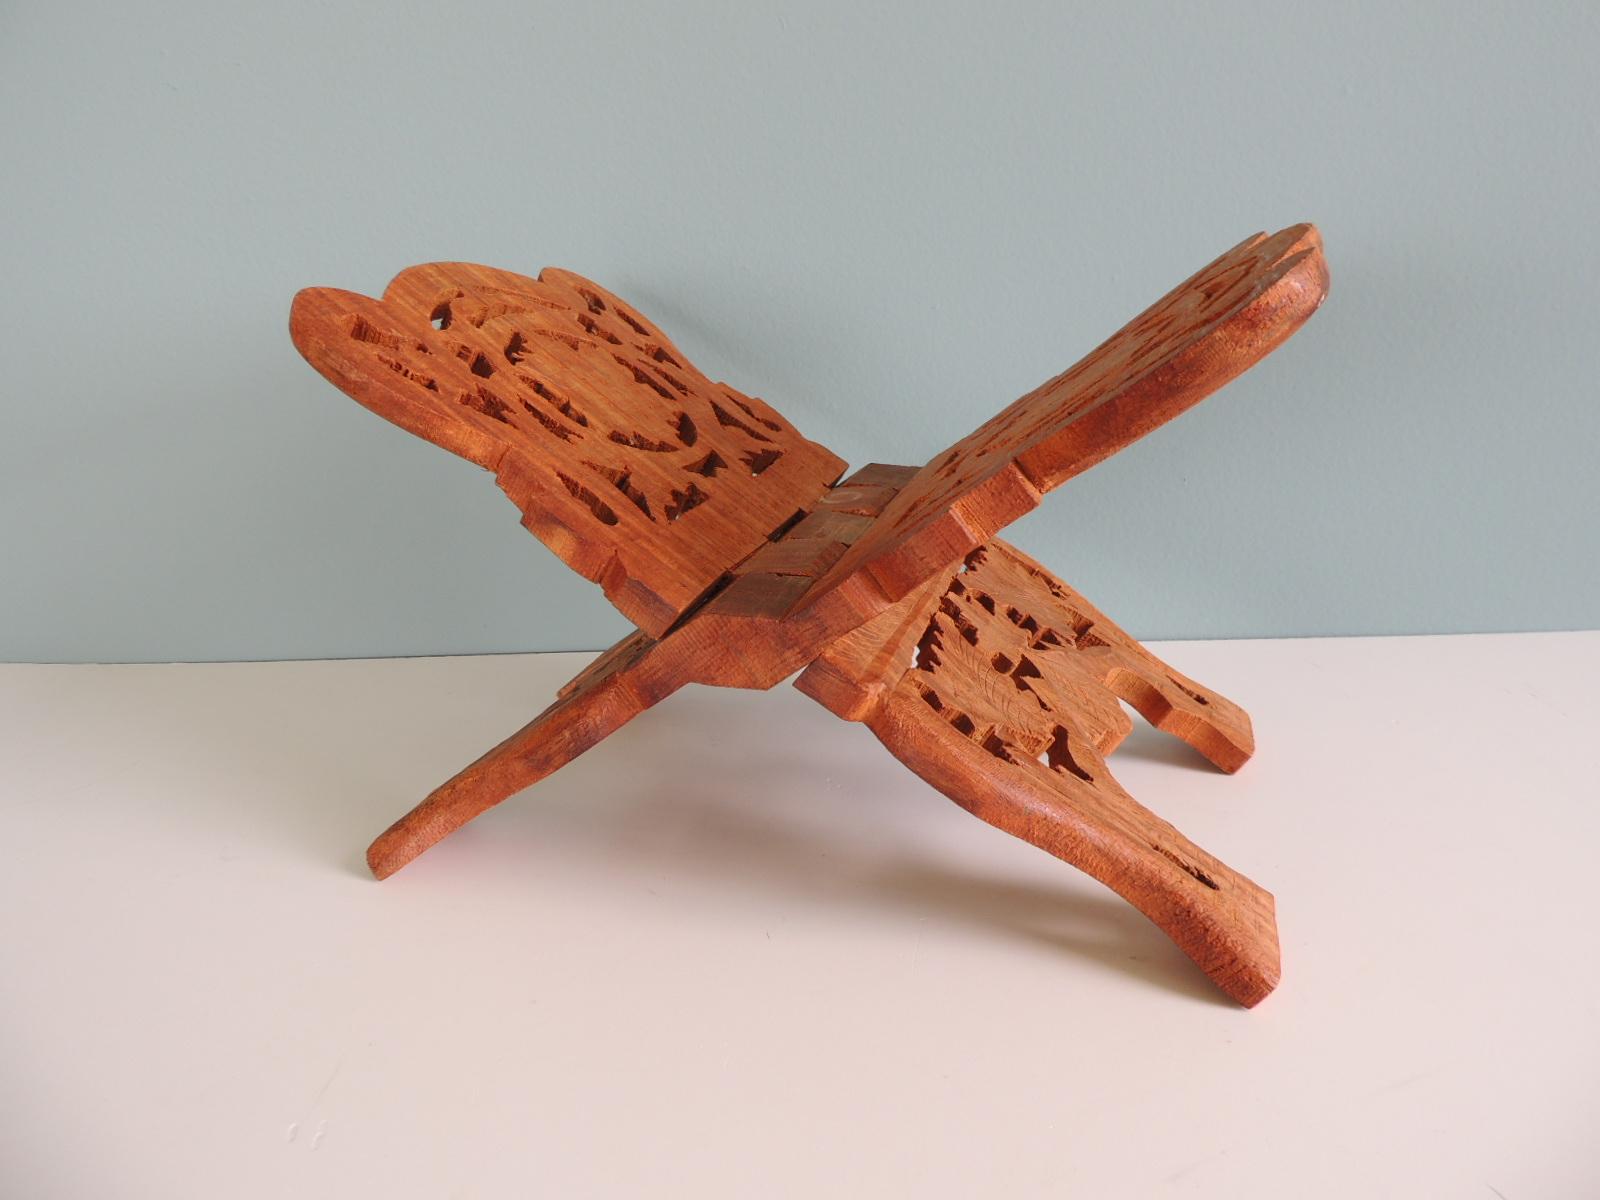 Hand carved wood vintage book stand
Folding carved stand made by hand from one solid piece of Sheesham wood: What is Sheesham wood? Also known as Dalbergia sissoo, Sheesham is a fast-growing, sturdy, deciduous tree. In India, Sheesham wood is known